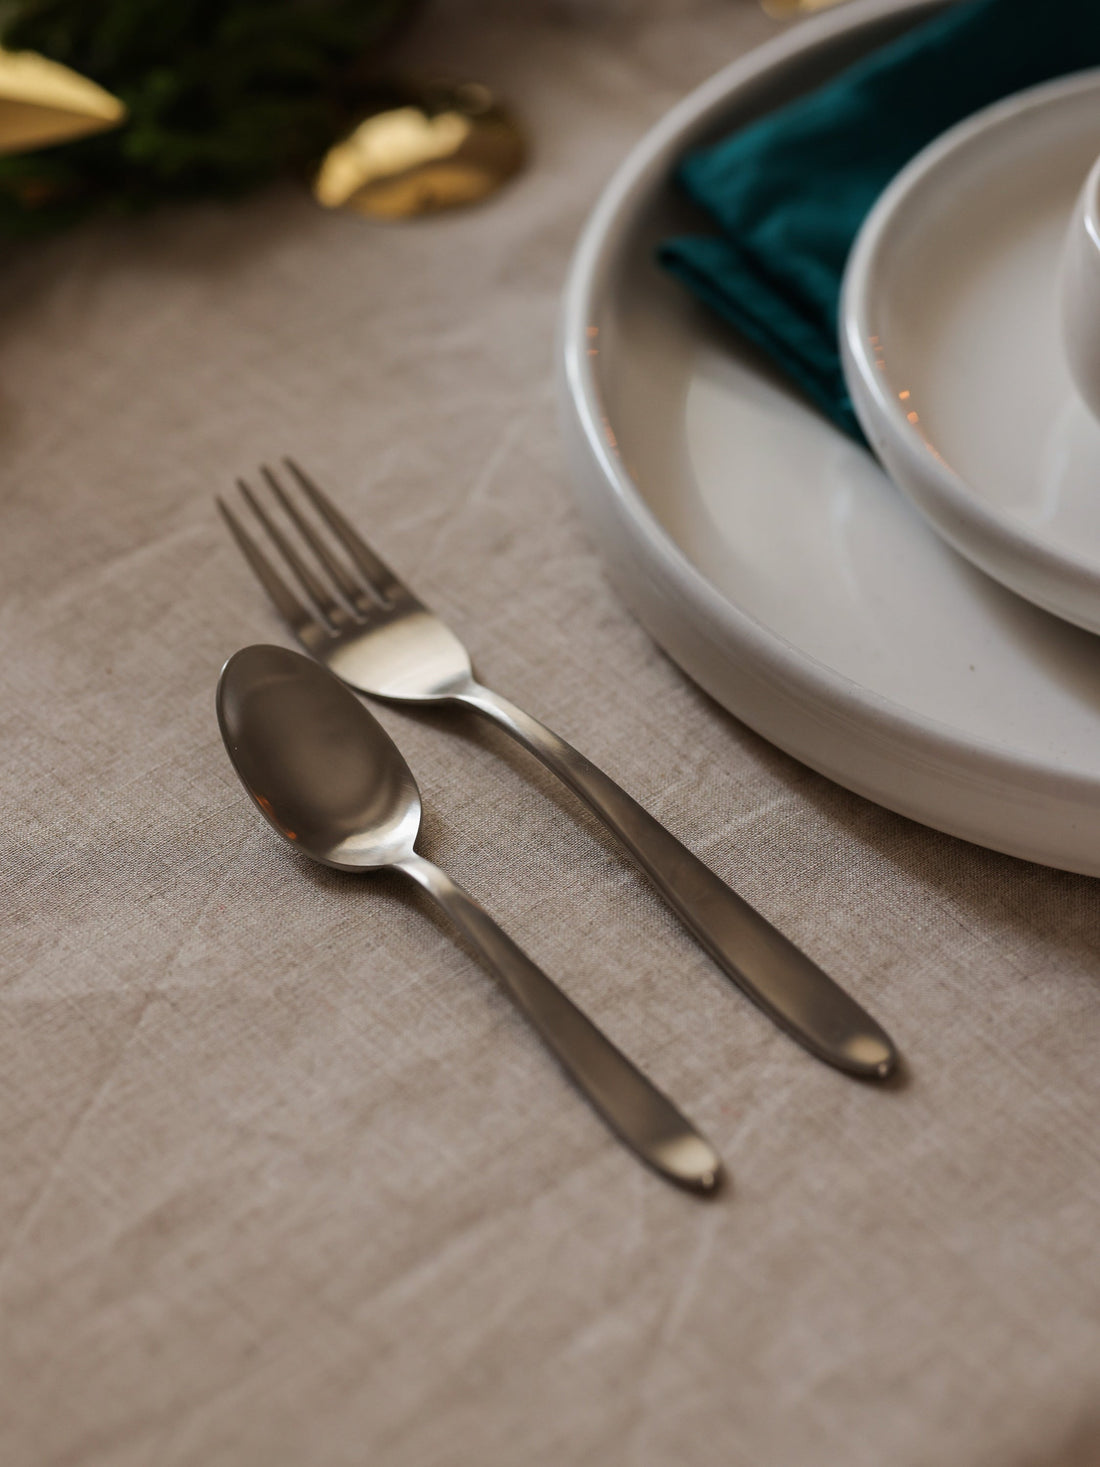 Willow high quality stainless steel flatware by Fleck